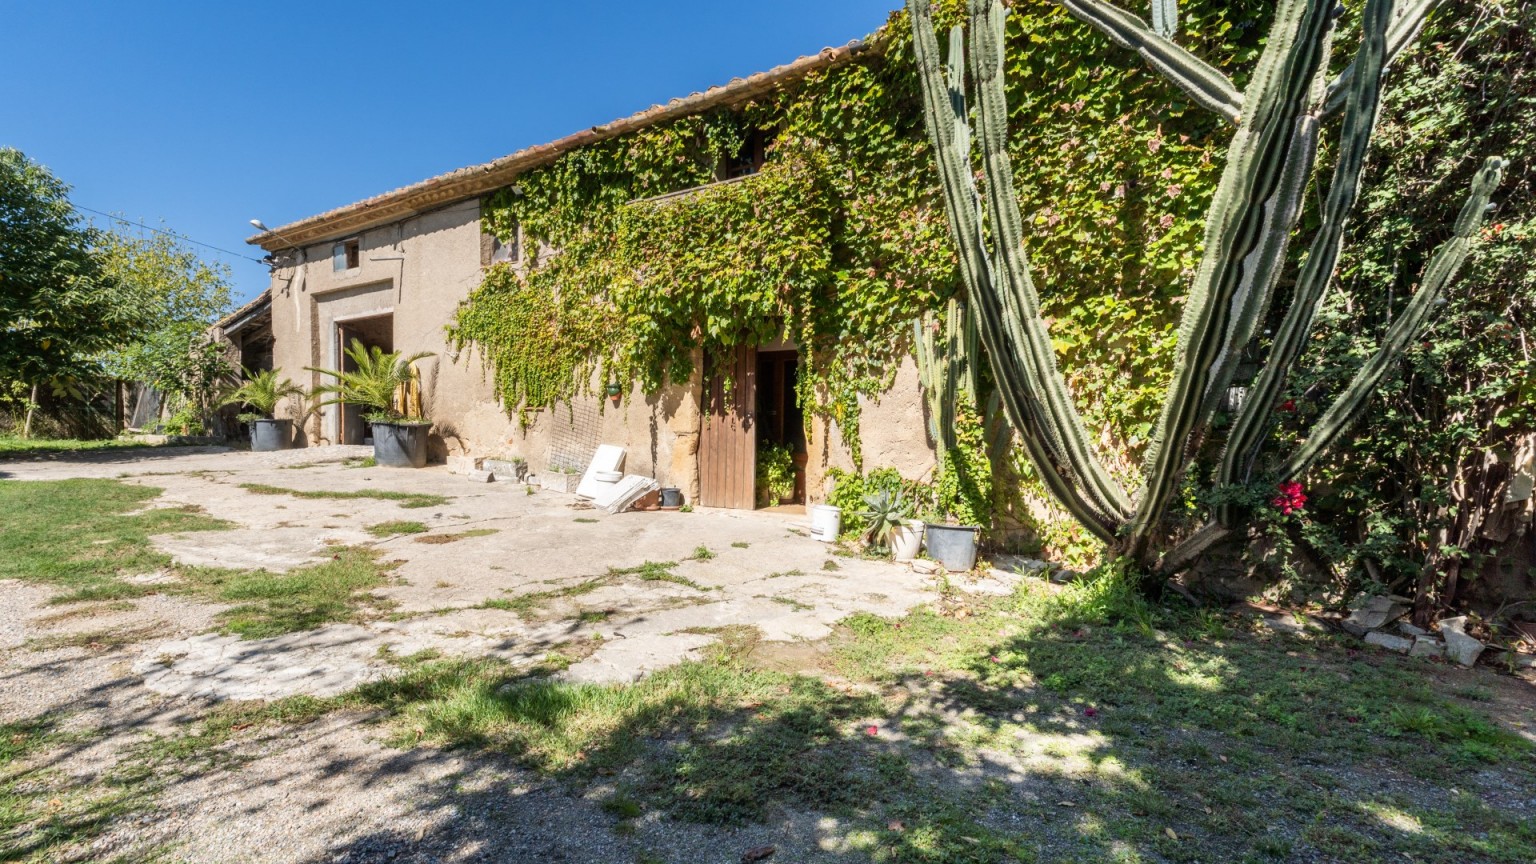 Farmhouse for sale with several lands in the town of Orriols.